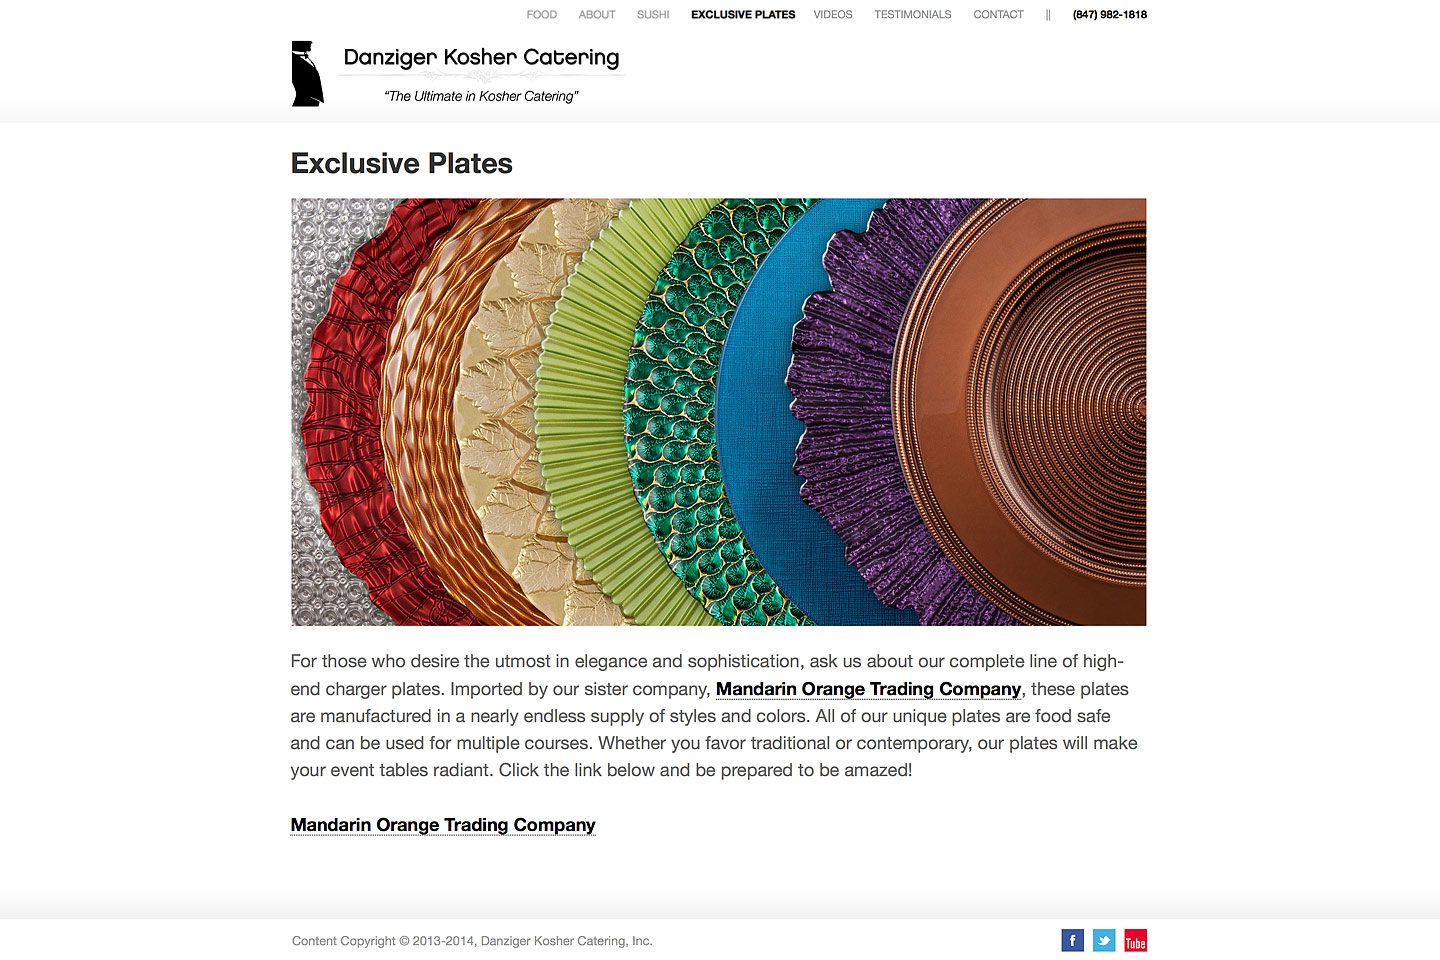 a rainbow array of beautiful exclusive charger plates available from mandarin orange trading company for use by danziger kosher catering clients